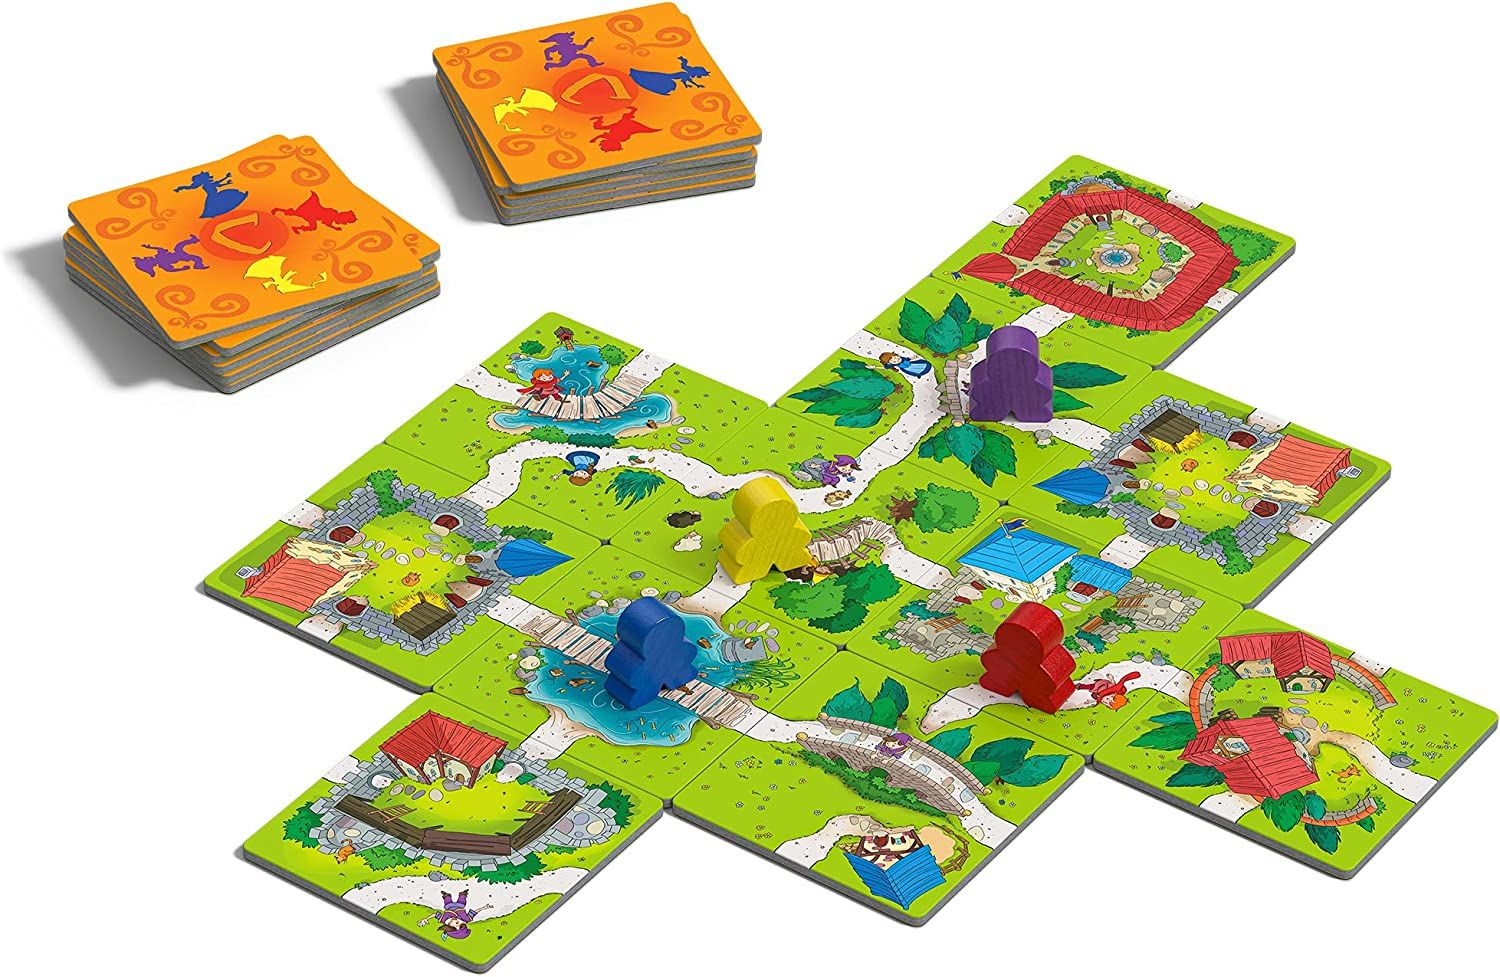 My First Carcassonne Board Game is one of the most beautiful board games for kids